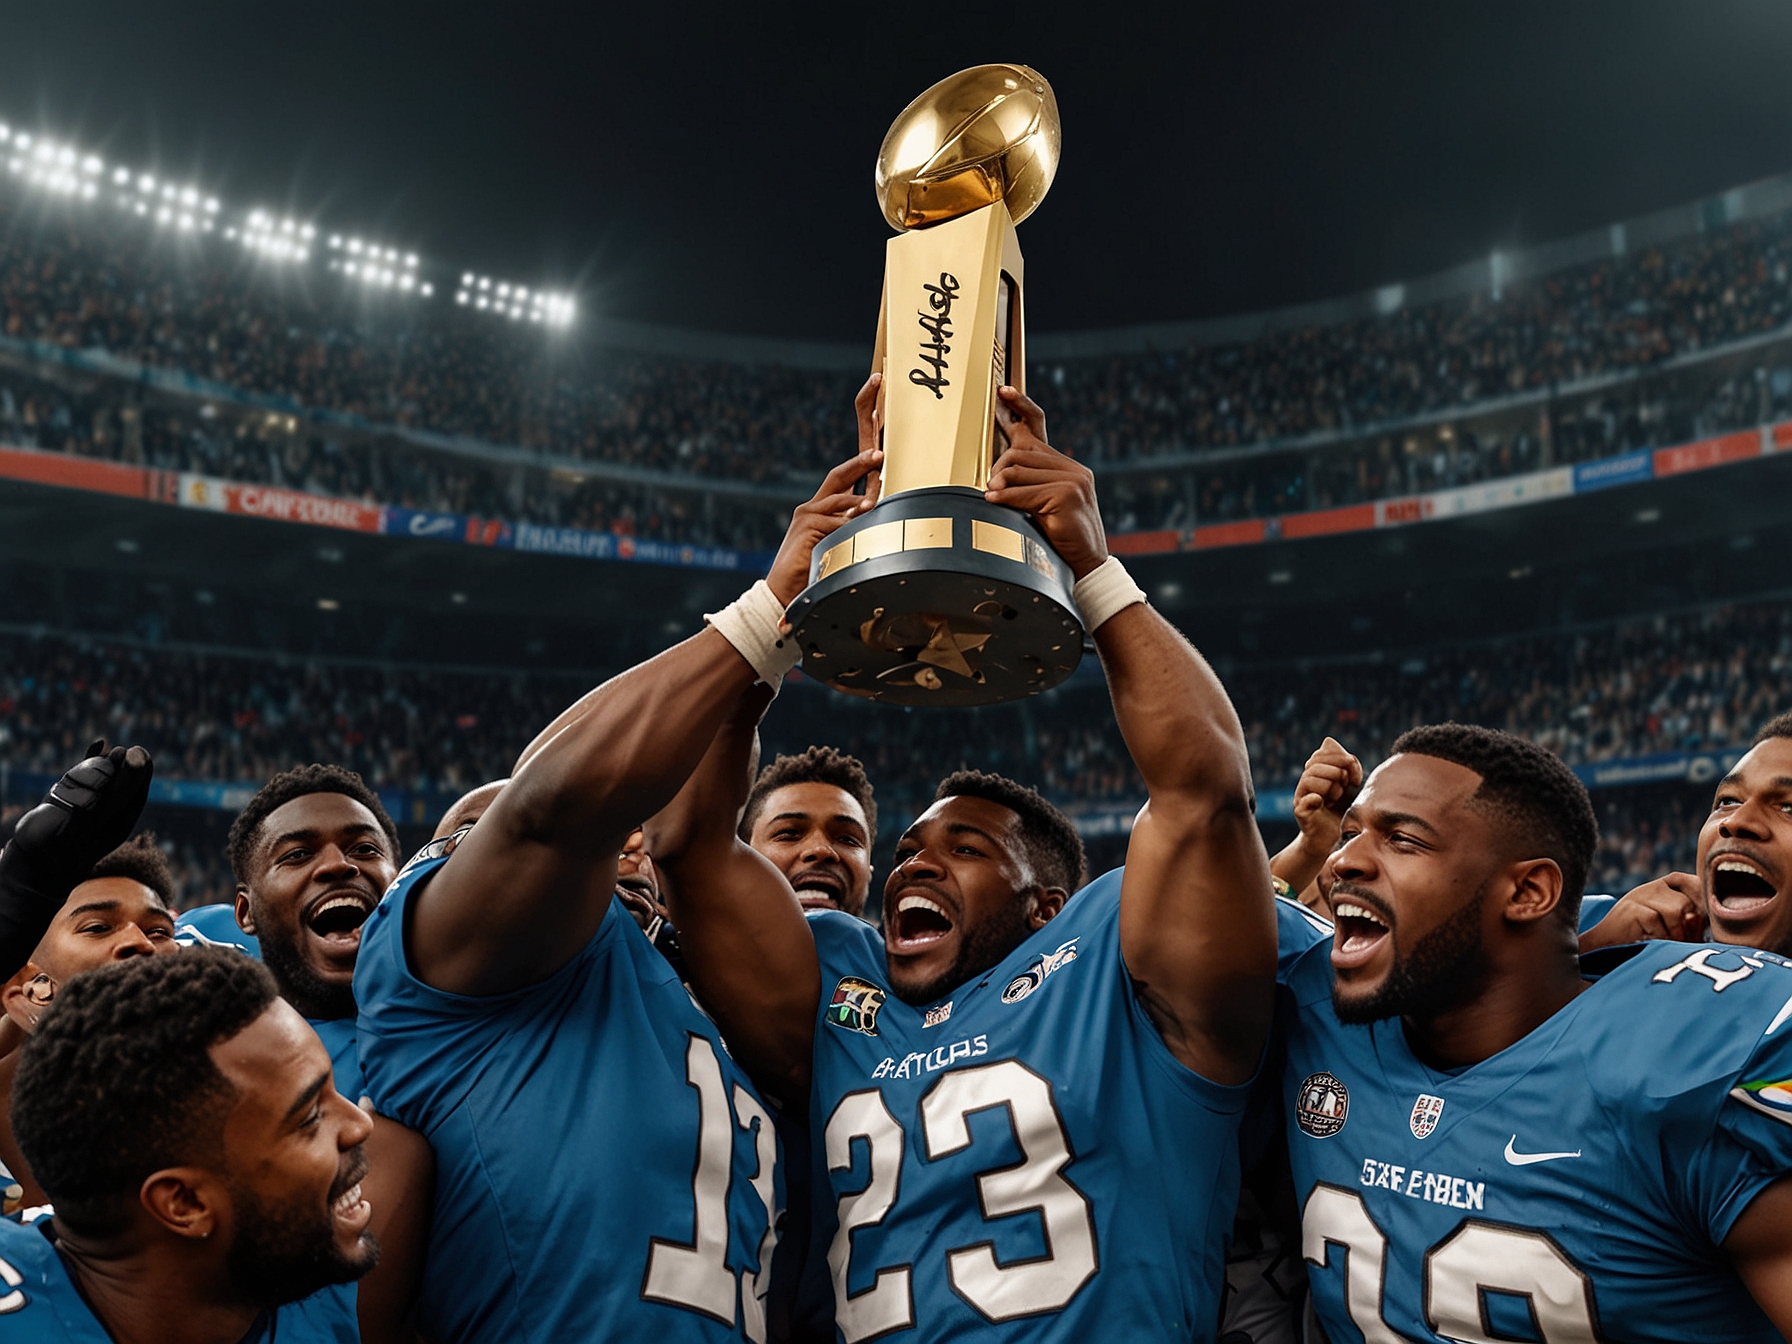 The Birmingham Stallions celebrate their third consecutive UFL championship with players lifting the trophy high, exemplifying their dominance and technical prowess throughout the season.